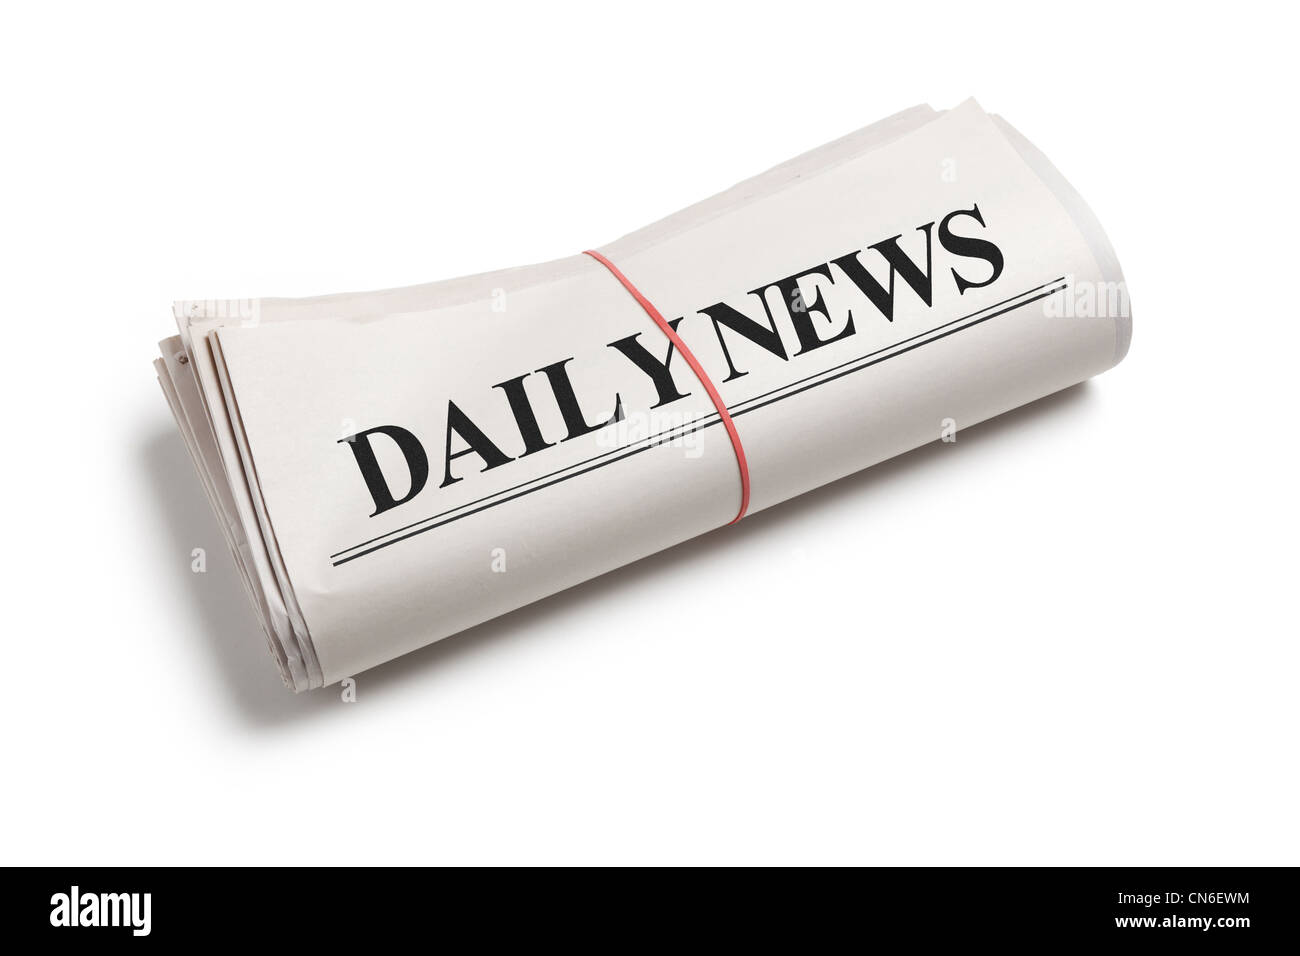 Daily News, Newspaper roll with white background Stock Photo